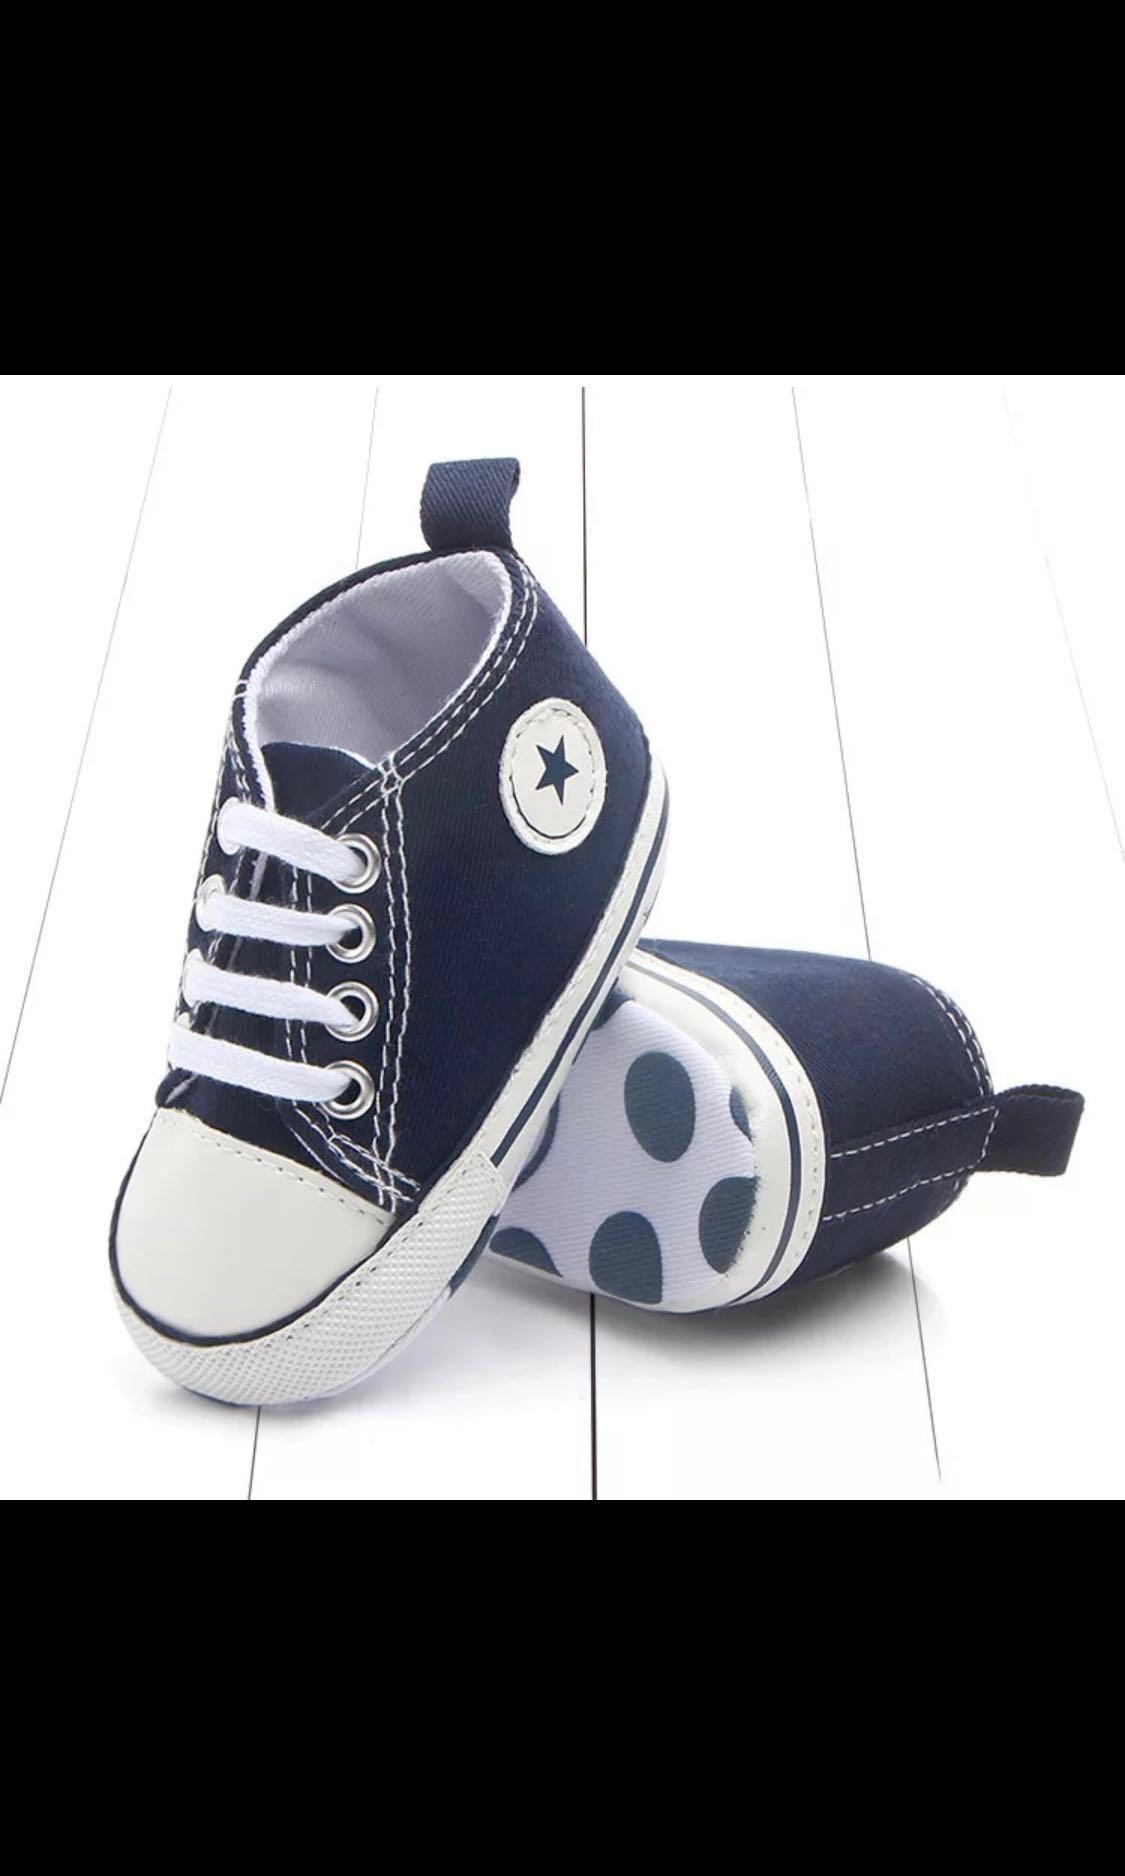 soft converse for babies